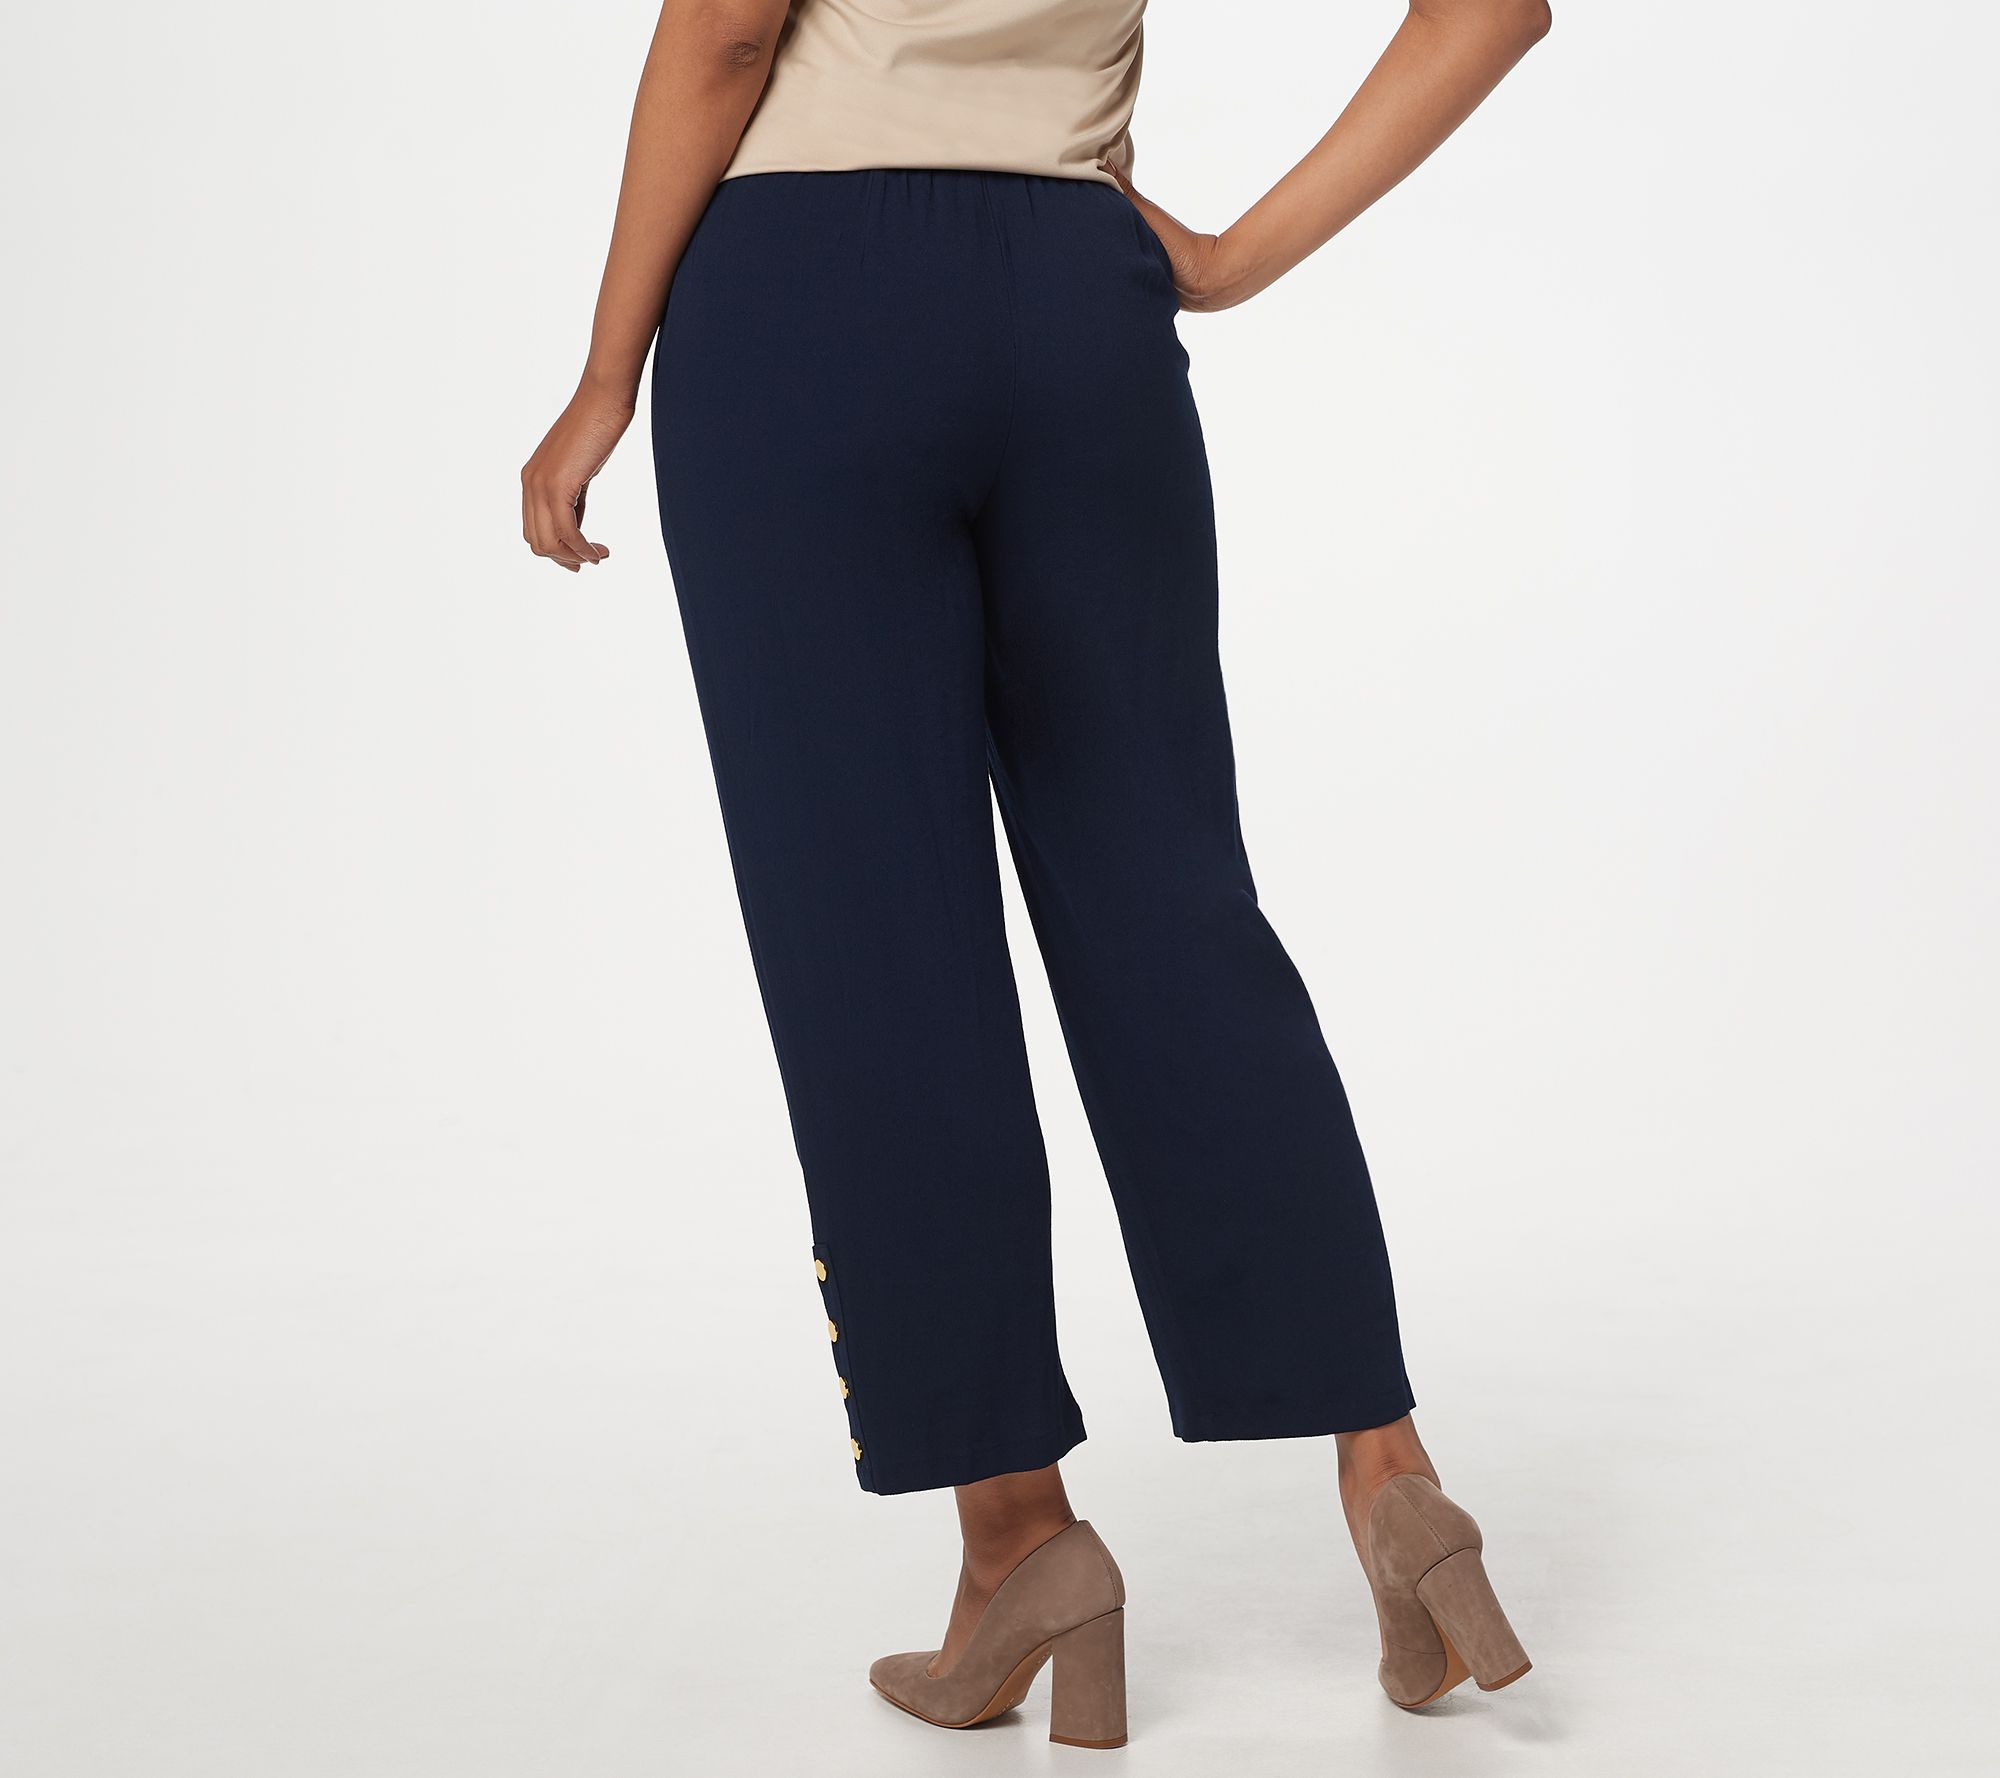 Linea by Louis Dell'Olio Pebble Crepe Pull-On Crop Pants w/ Studs - QVC.com